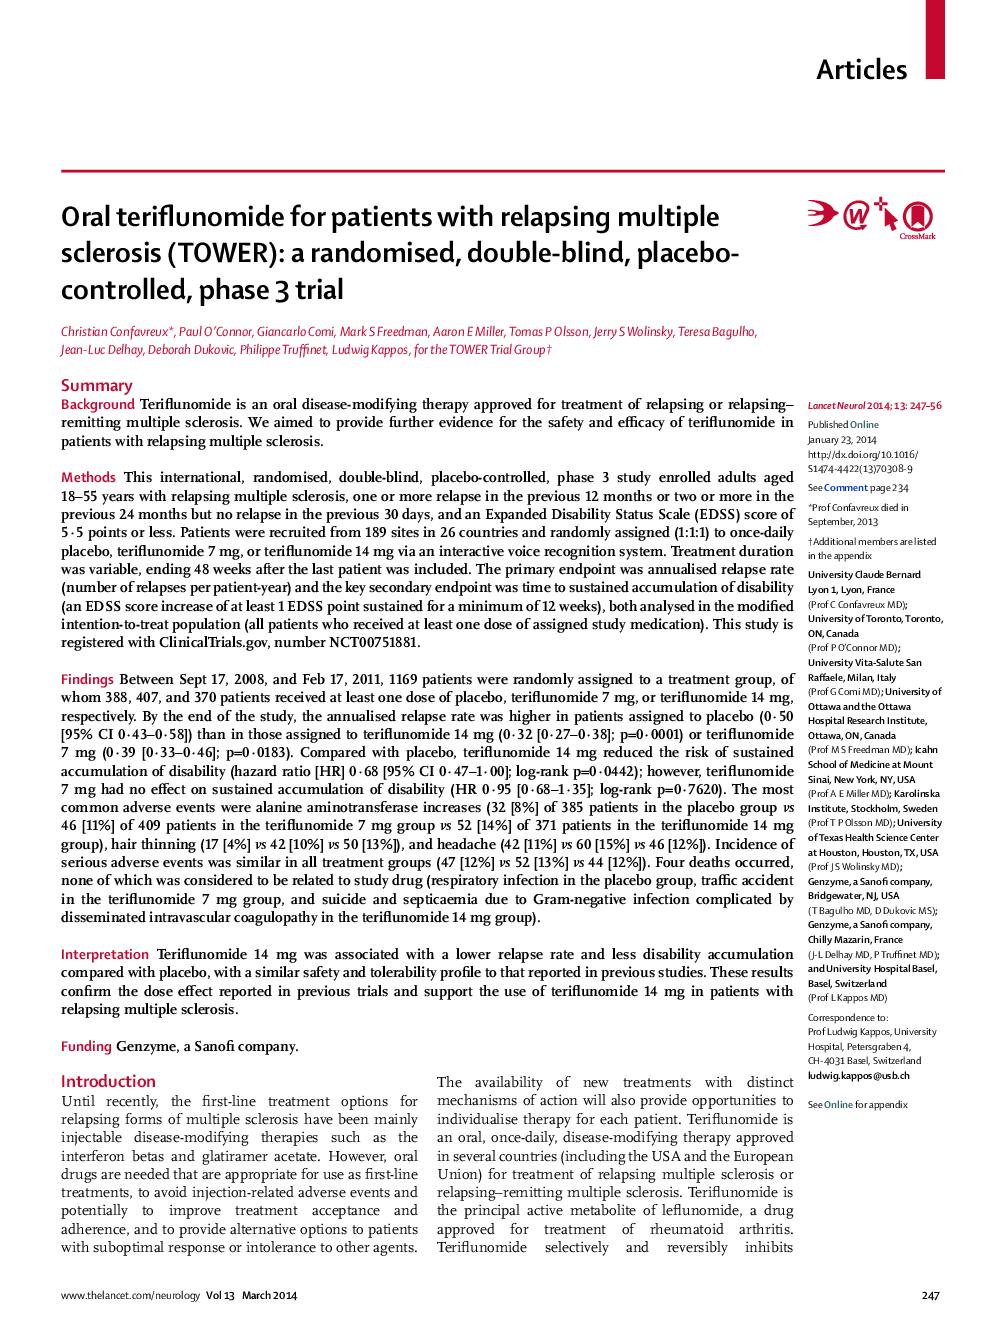 Oral teriflunomide for patients with relapsing multiple sclerosis (TOWER): a randomised, double-blind, placebo-controlled, phase 3 trial